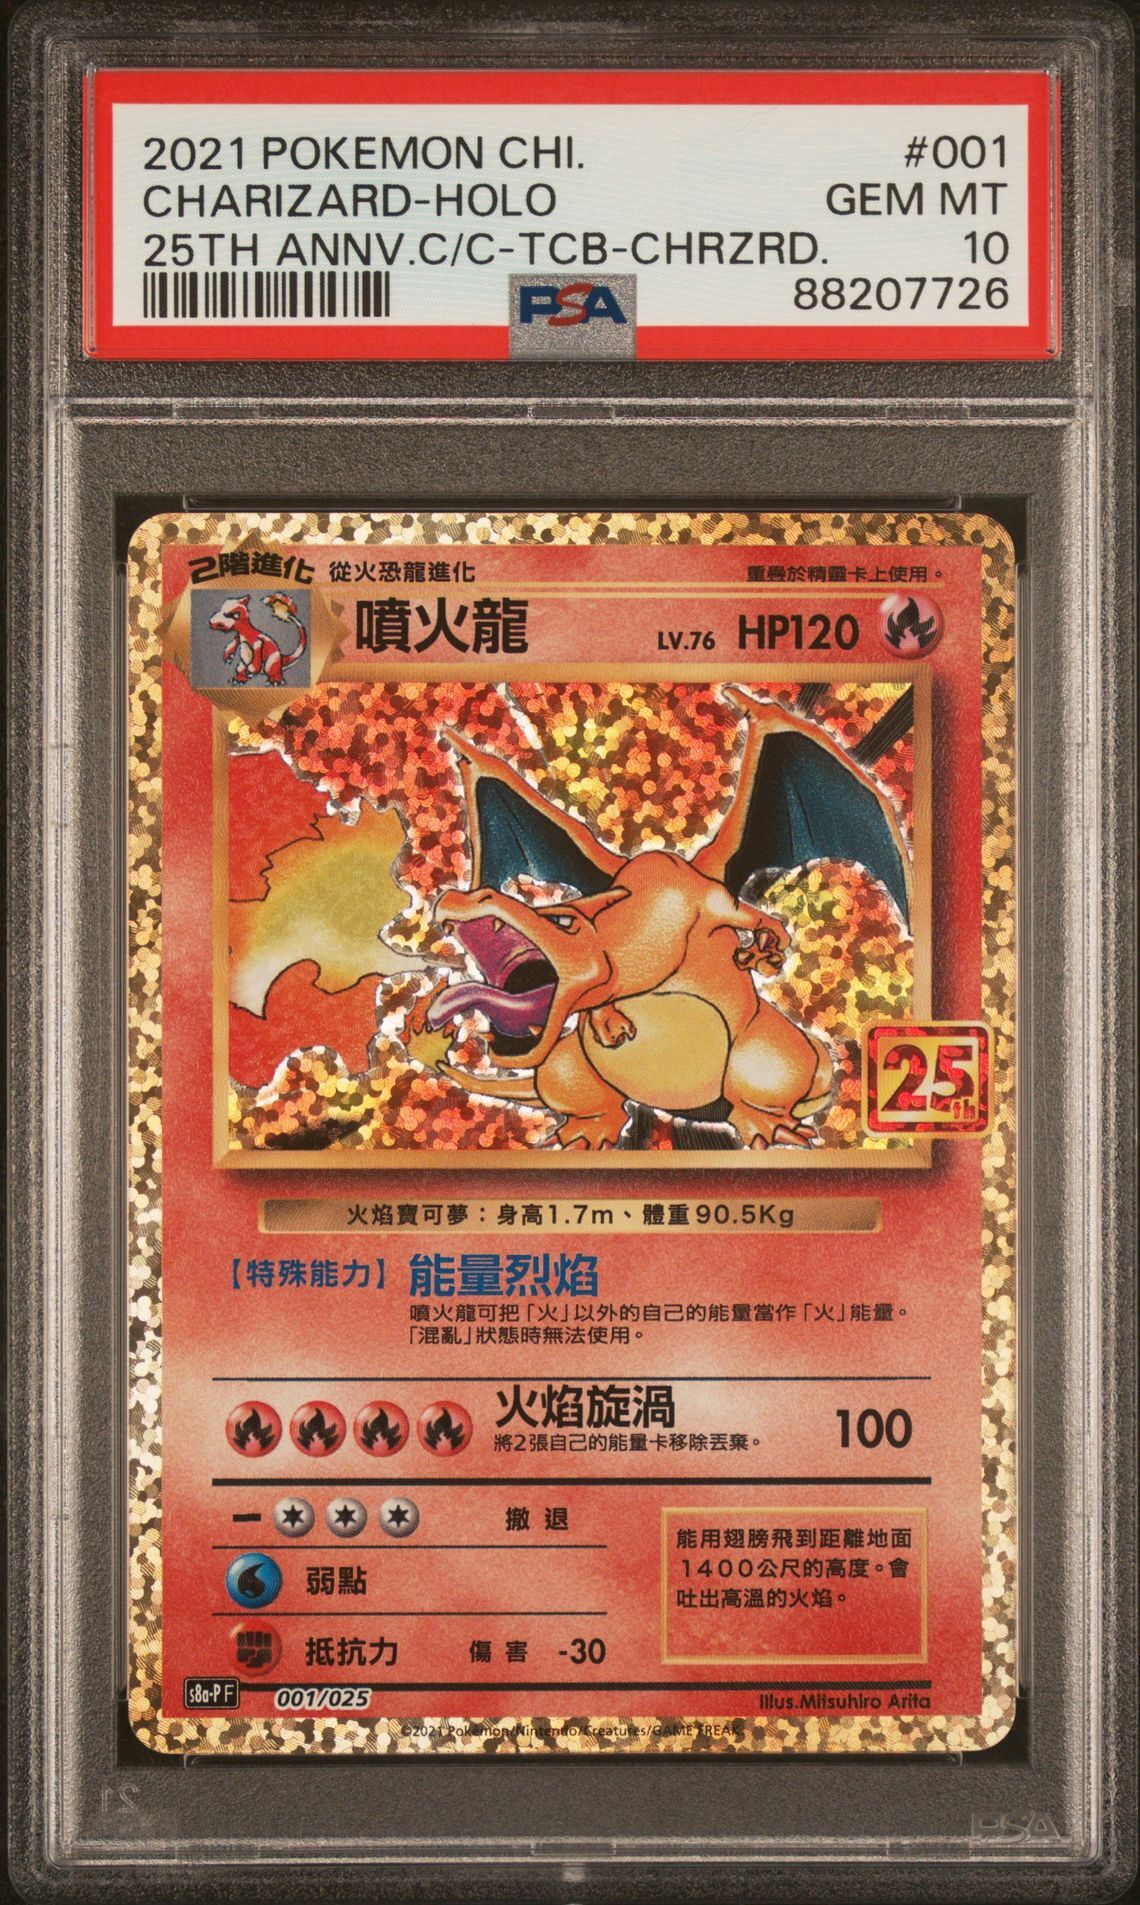 2021 POKEMON CHINESE 25TH ANNIVERSARY CLASSIC COLLECTION 001 CHARIZARD-HOLO TOP COLLECTION BOX-CHARIZARD - PSA 10 GEM-MT - Pokémon